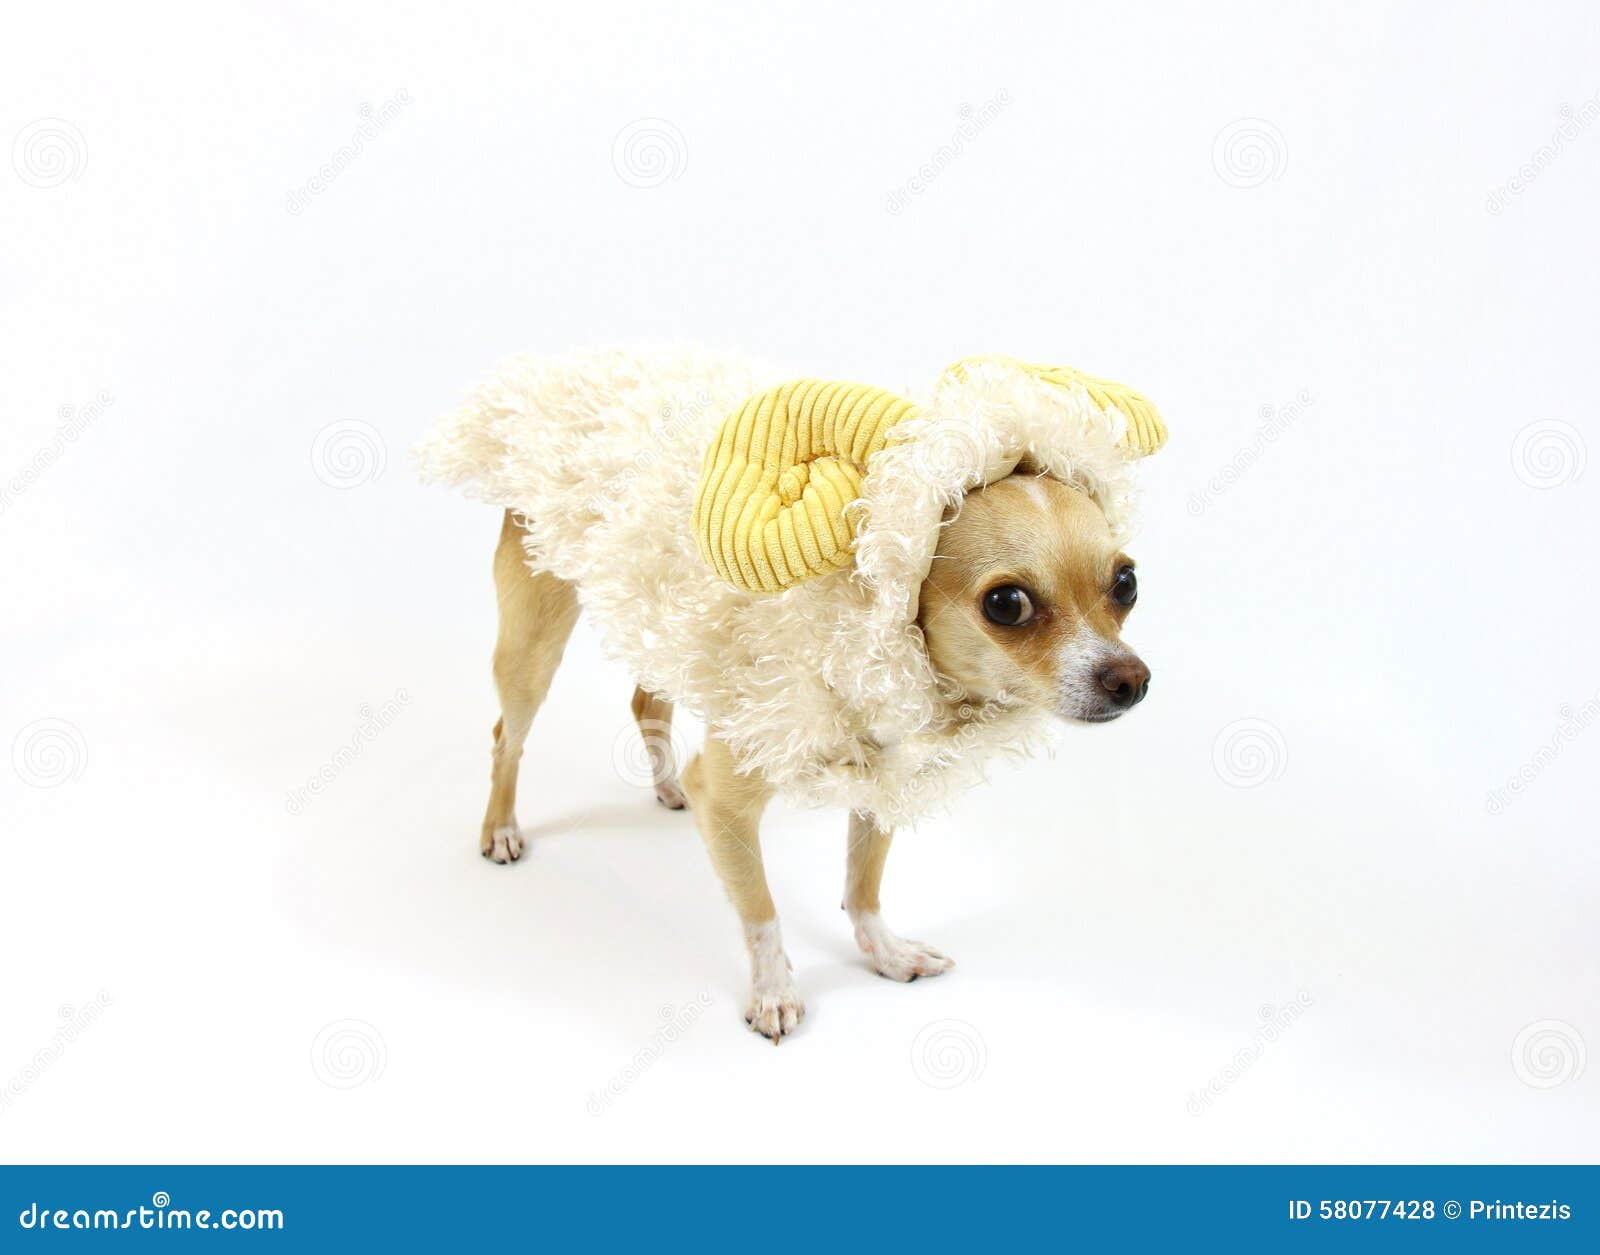 1,643 Sheep Costume Stock Photos - Free & Royalty-Free Stock Photos from Dreamstime